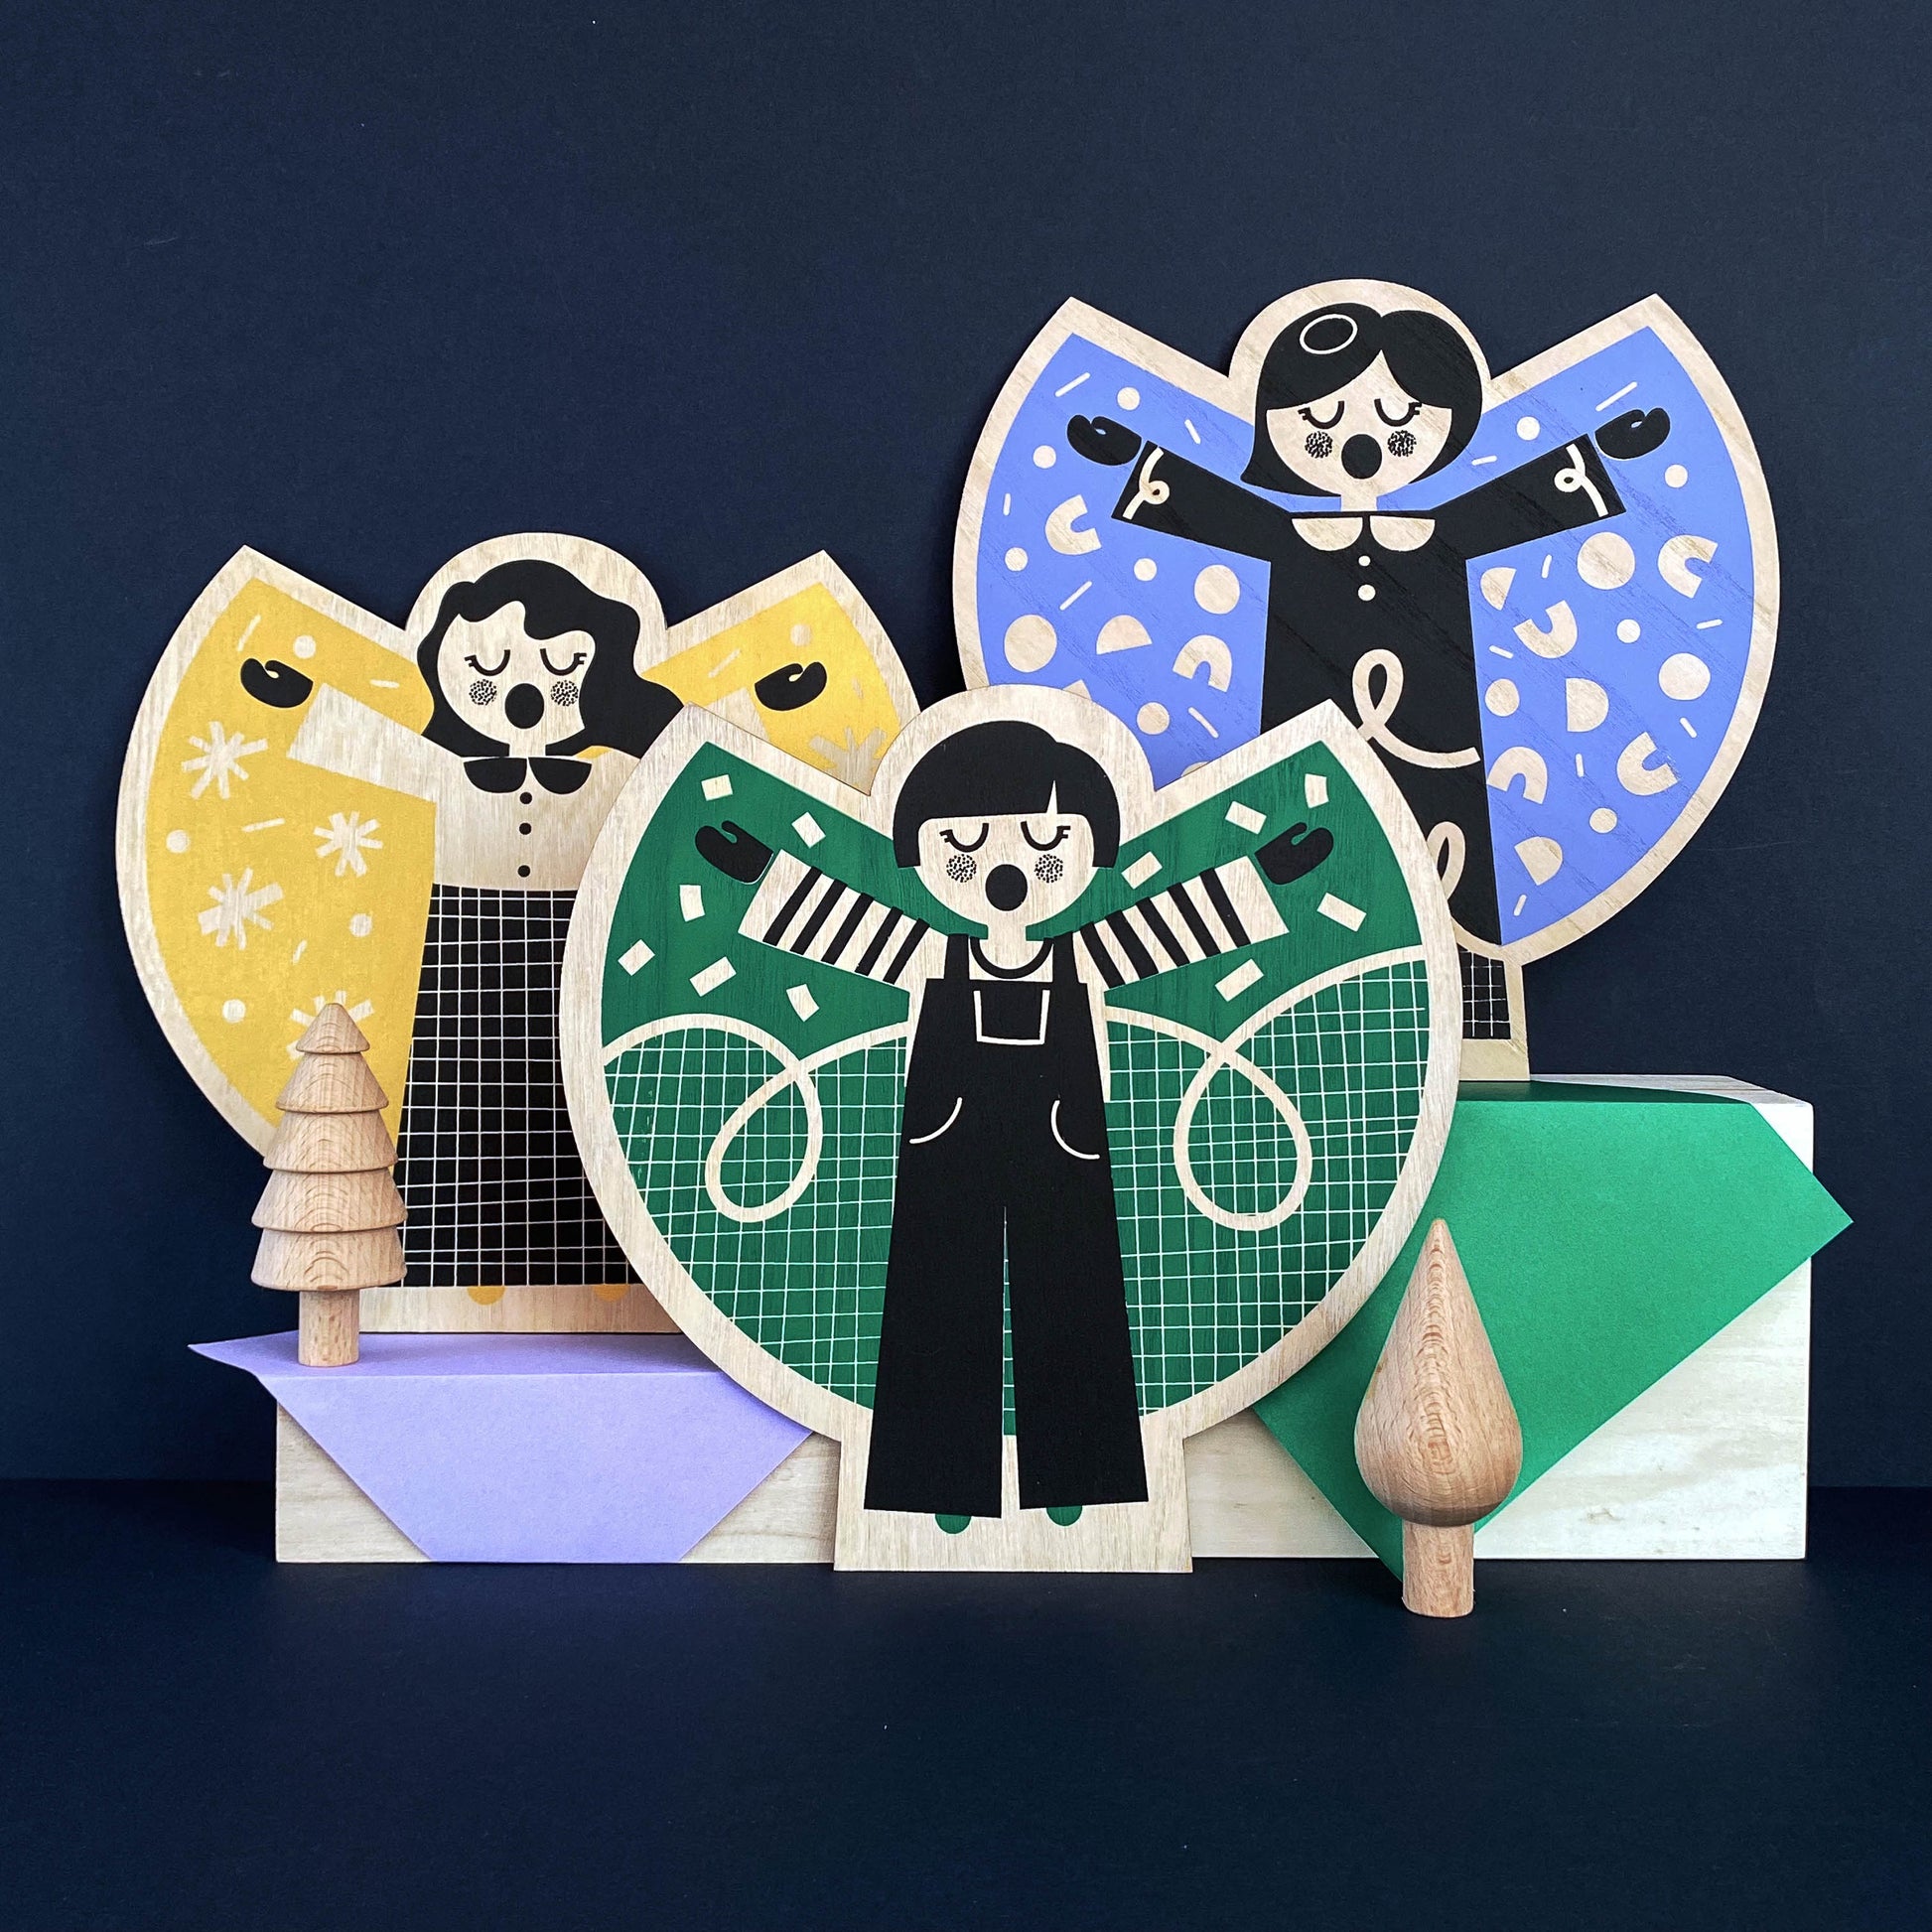 Screen Printed Wooden Angel by The Print Lass - Lilac, green and gold Angels shown on a navy background